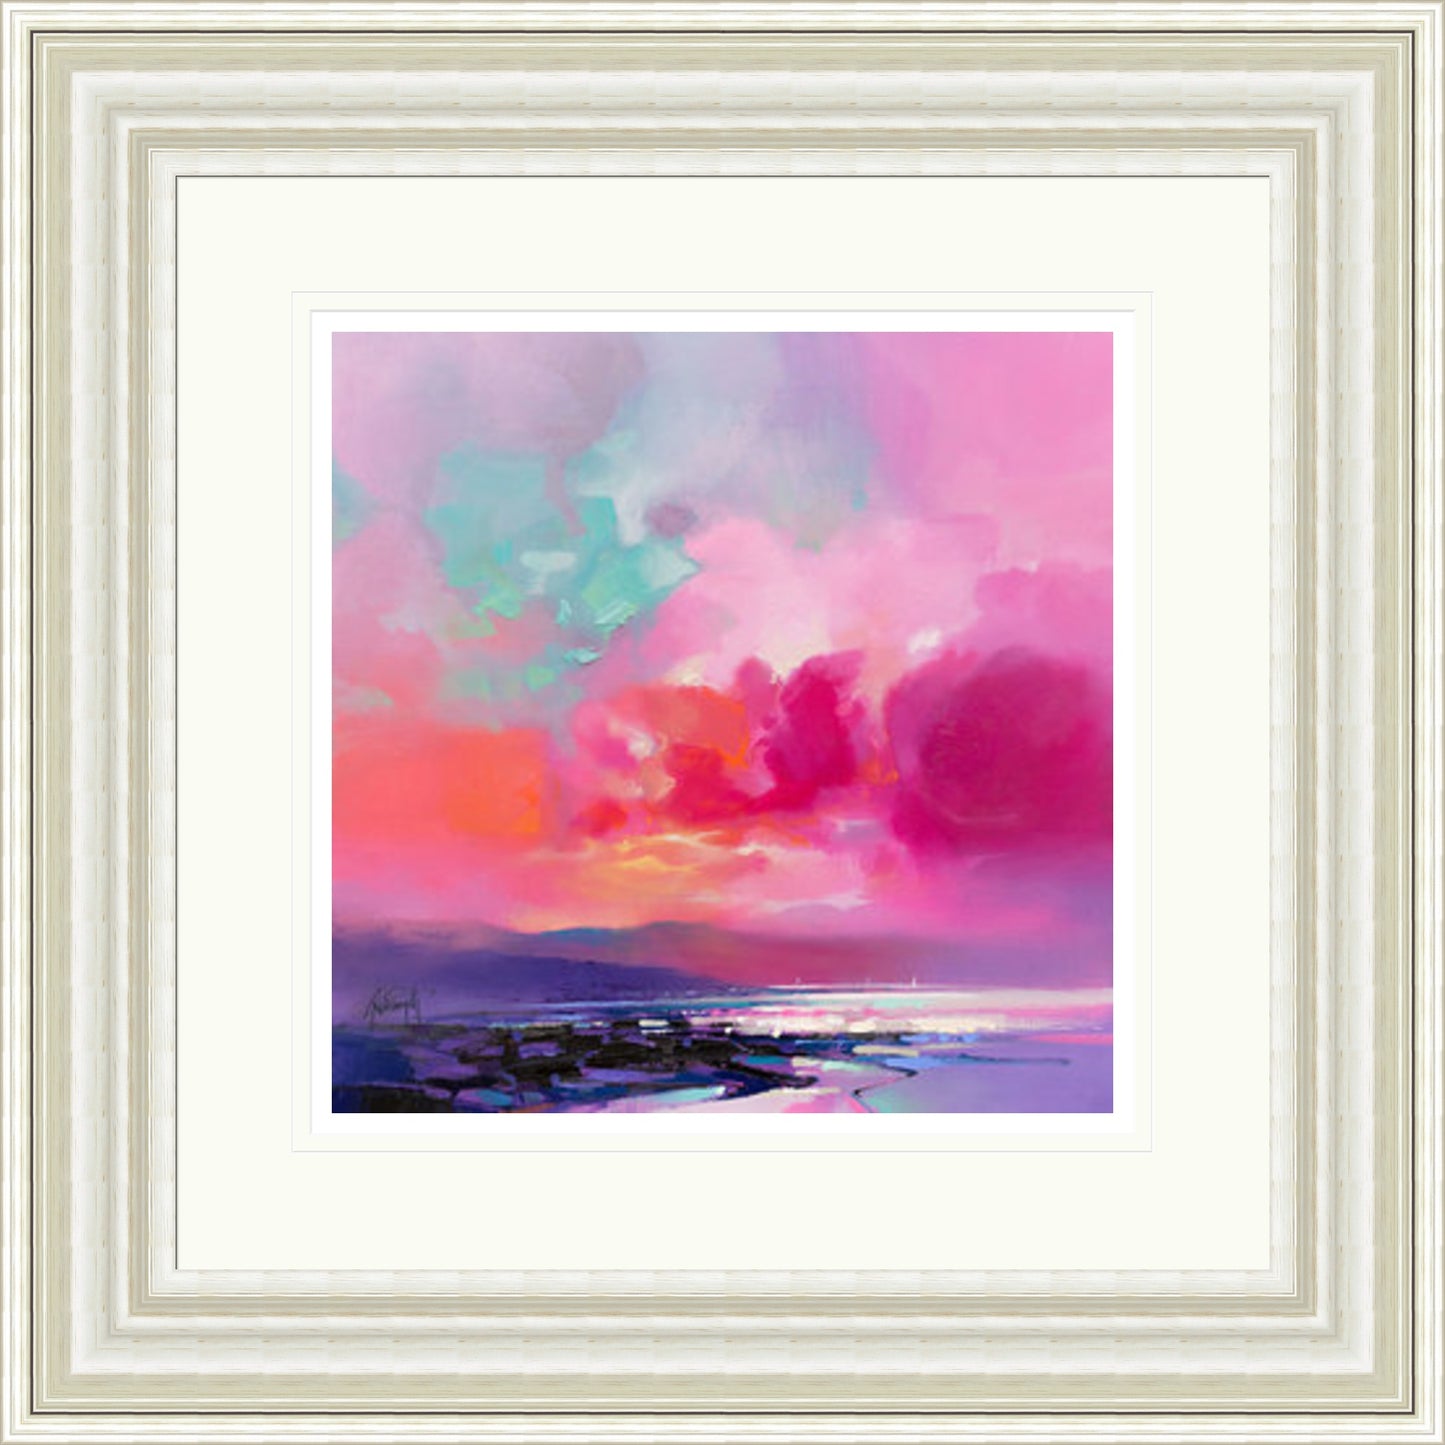 Loch Fyne Sailing (Signed & Numbered Limited Edition) by Scott Naismith